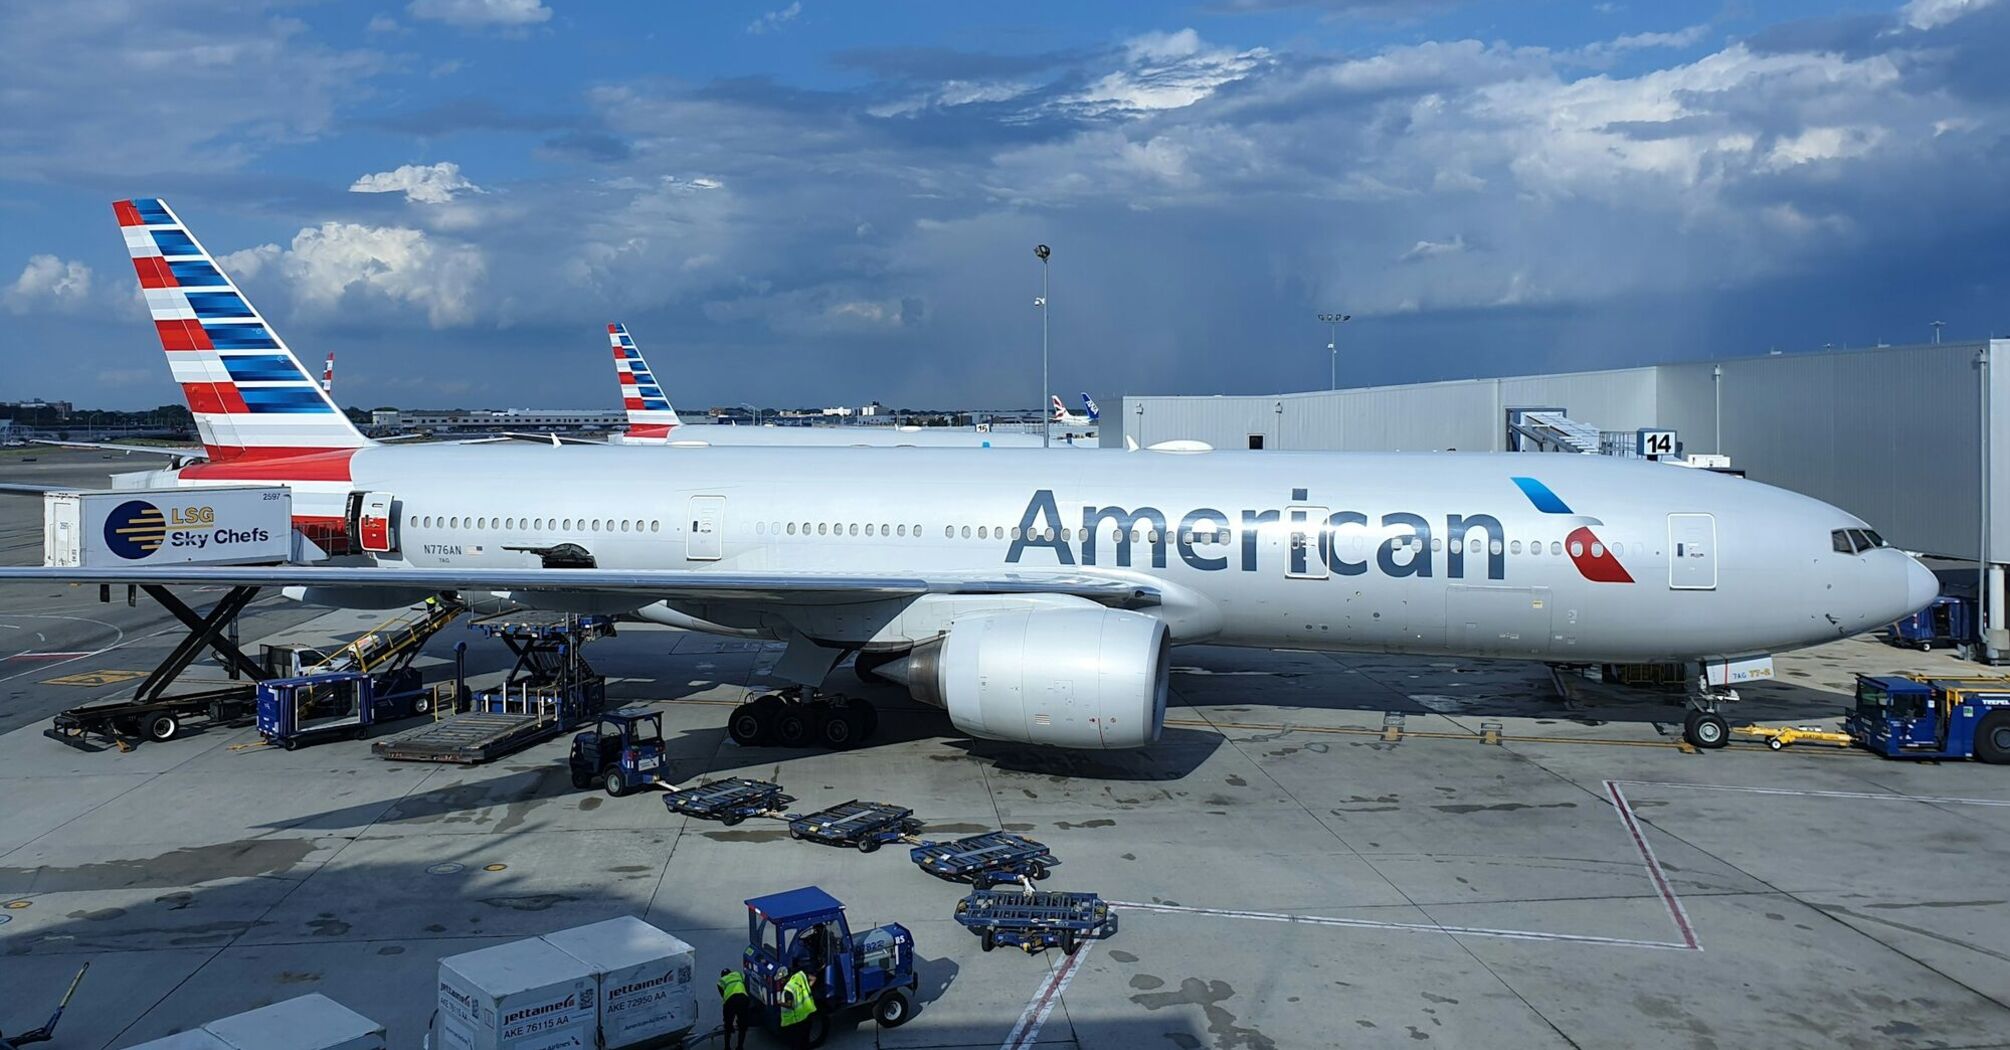 American Airlines aircraft parked at the airport